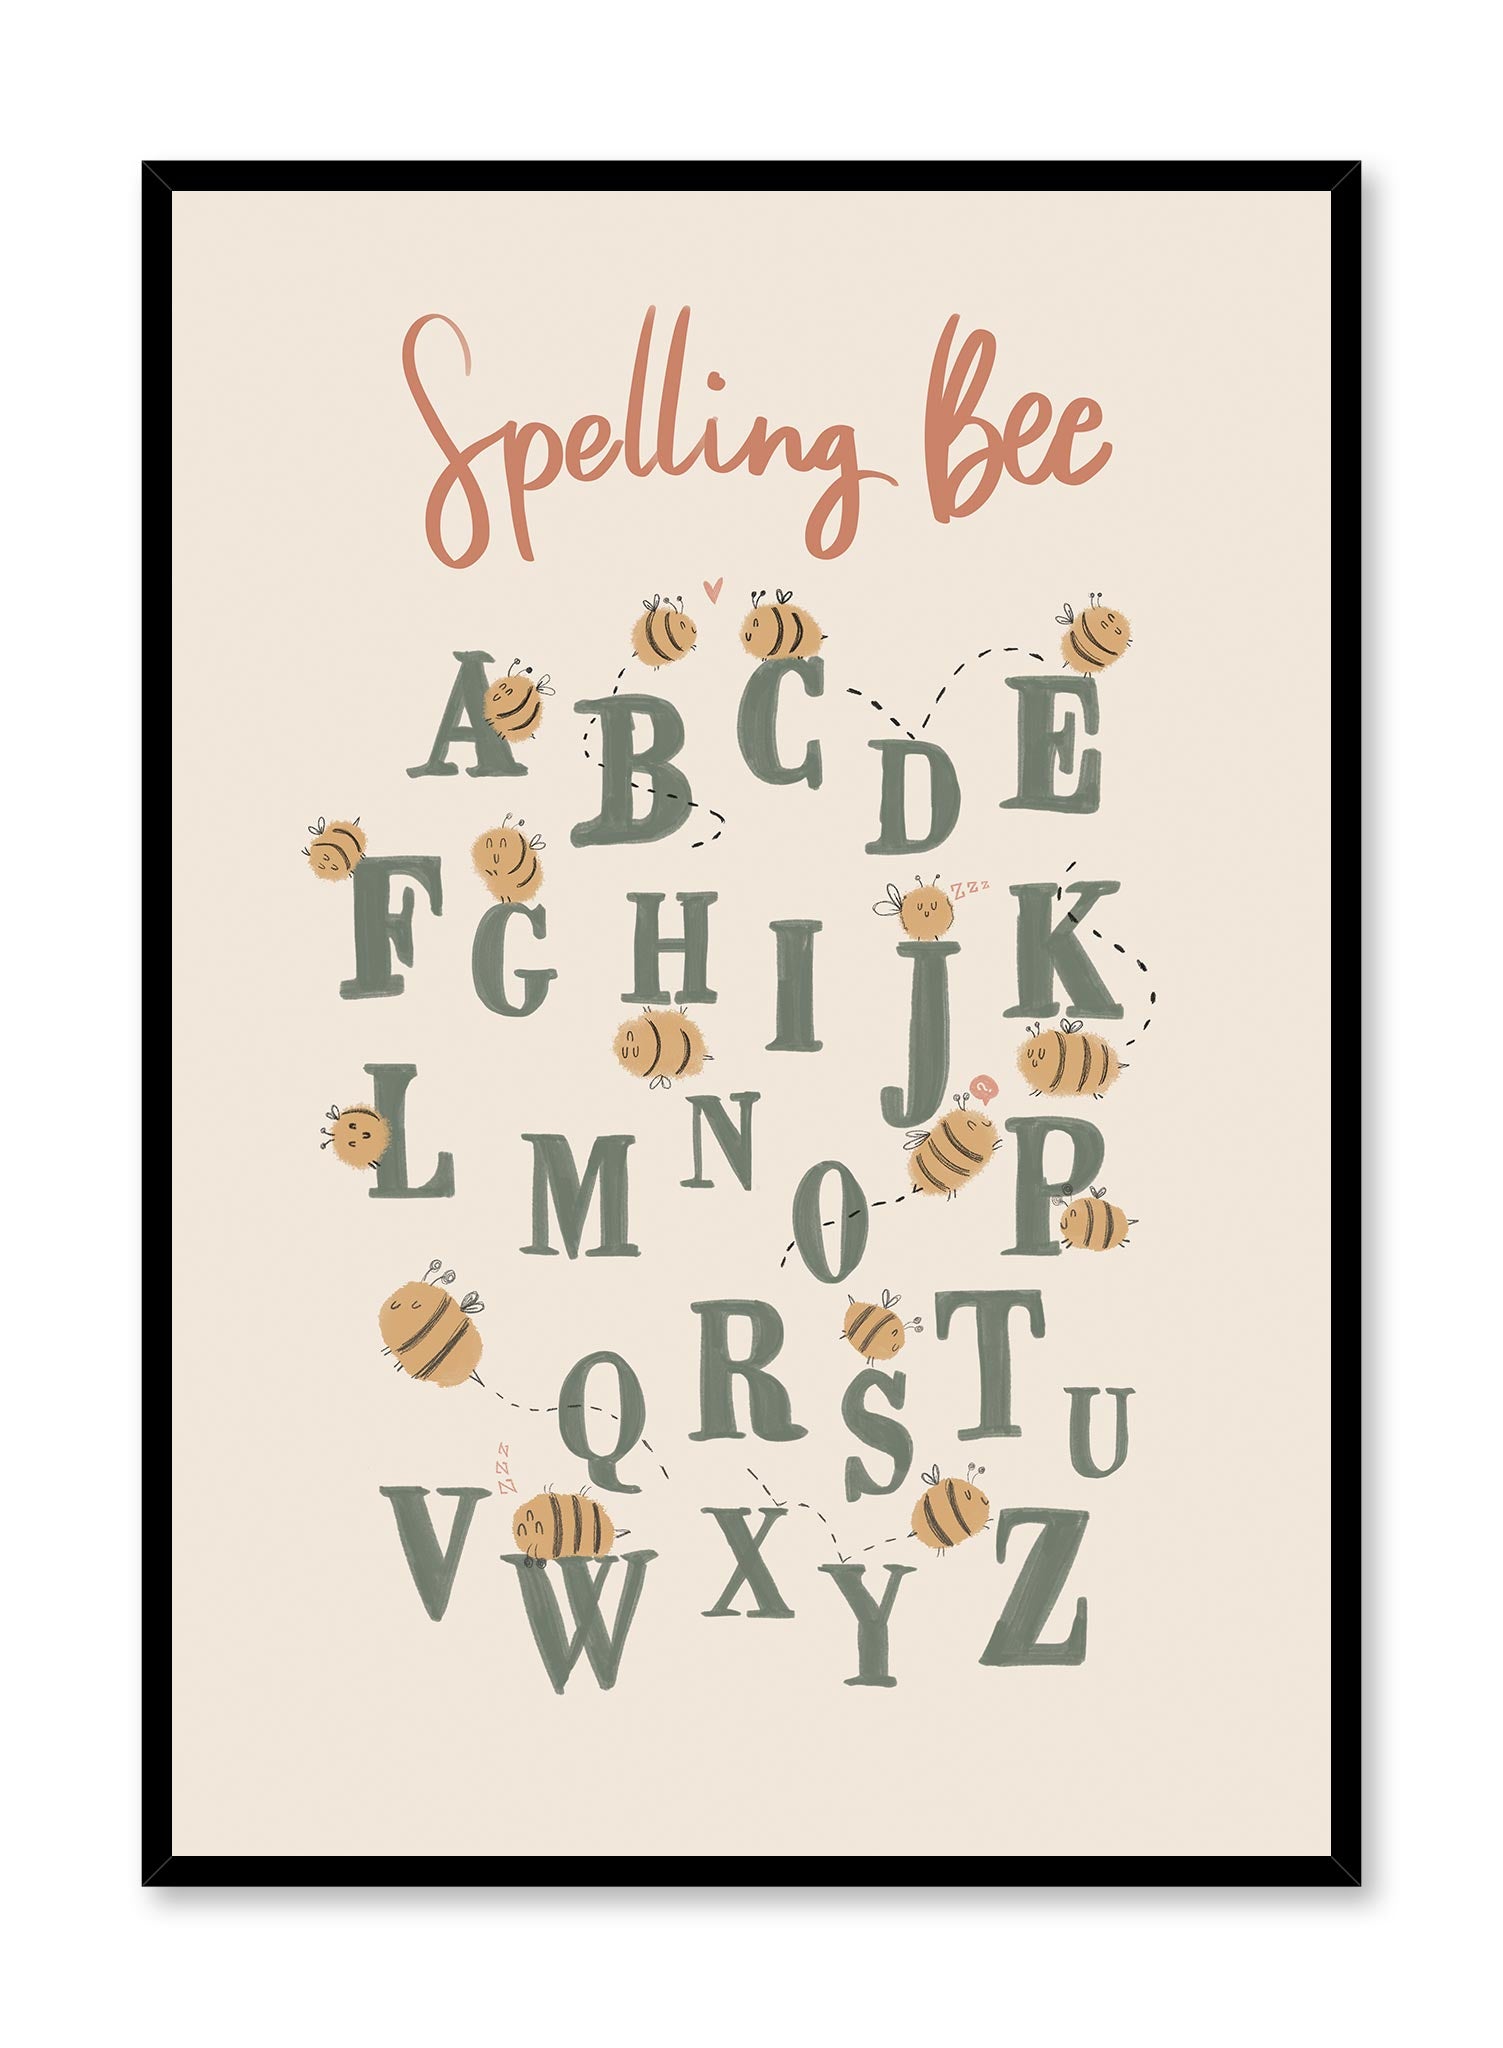 Spelling Bee is a minimalist typography by Opposite Wall of each letter of the alphabet where bees are hovering over different letters.